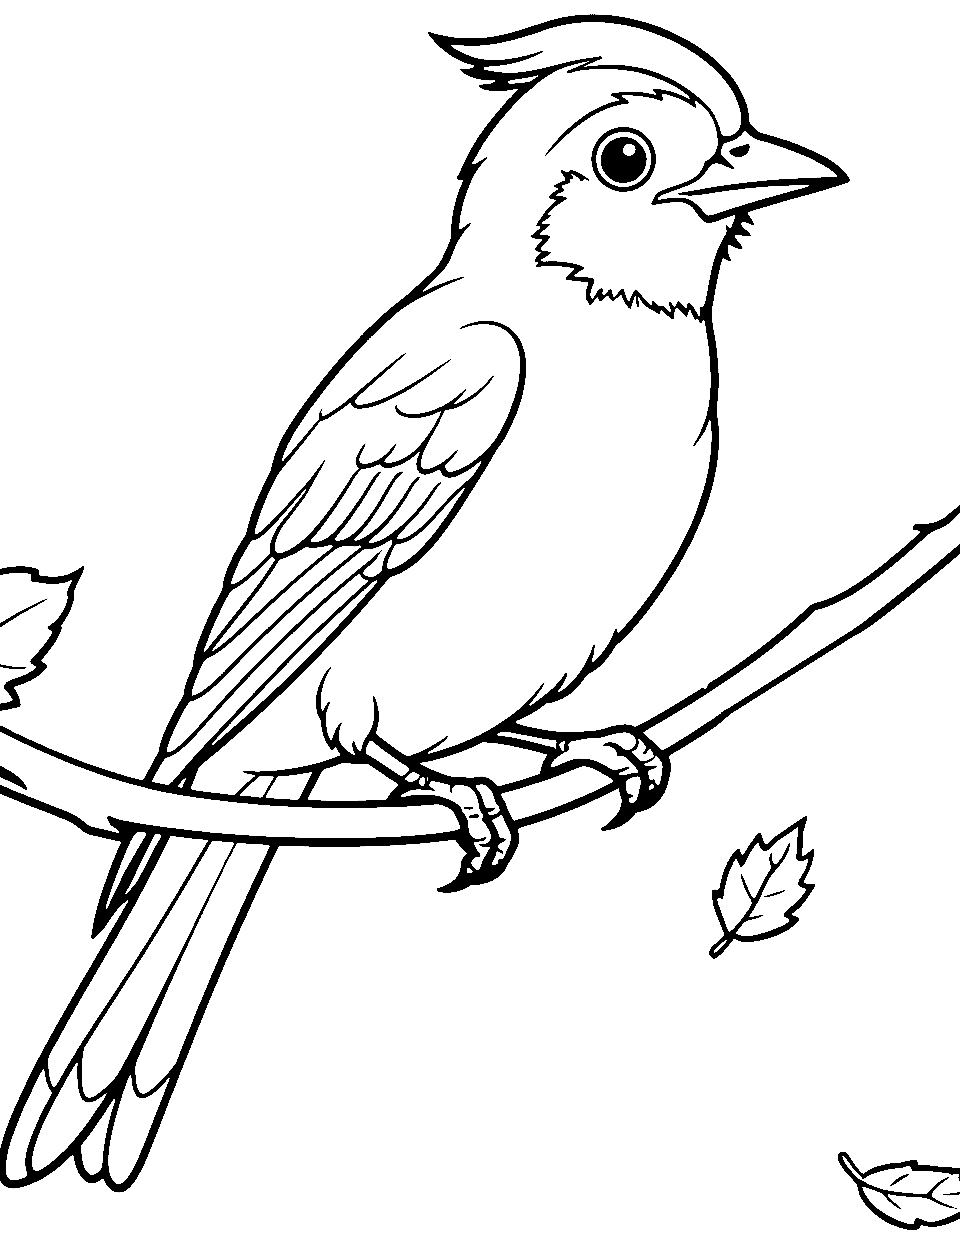 Blue Jay in Fall Coloring Page - A blue jay spotted on a tree in the autumn season.